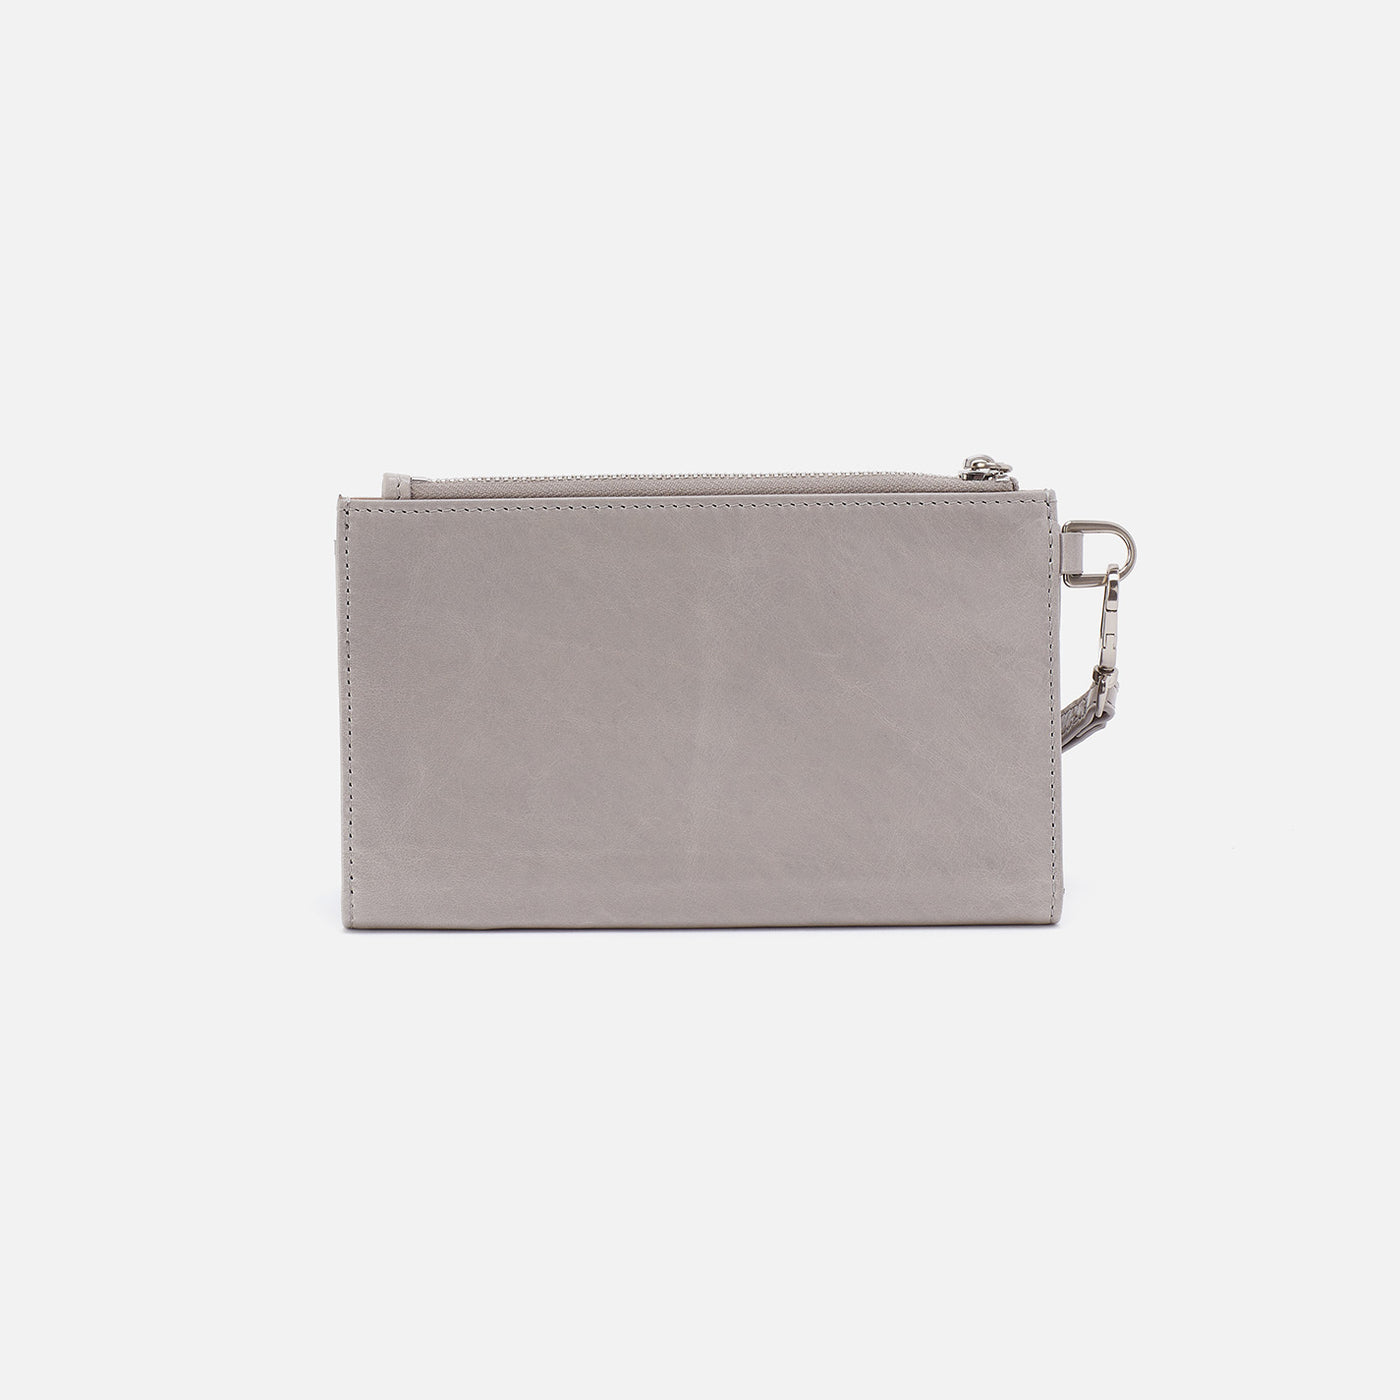 Kali Phone Wallet in Polished Leather - Light Grey